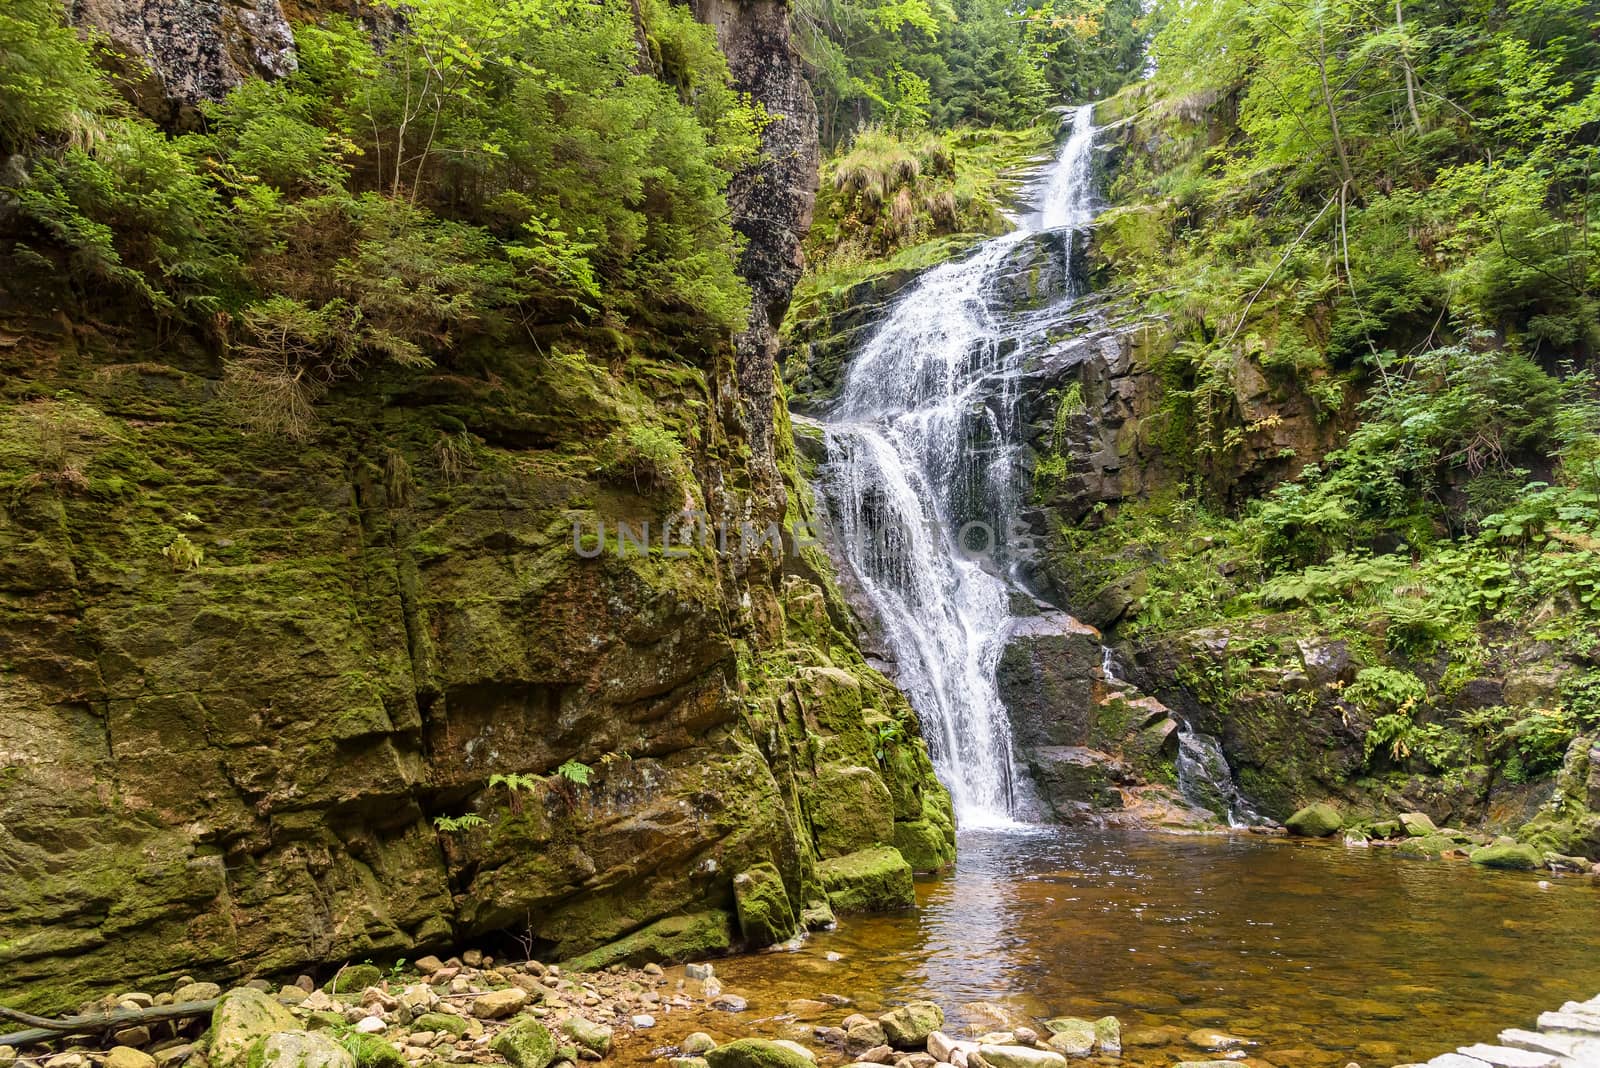 Waterfall of Kamienczyk river - the highest waterfall in polish Giant Mountains